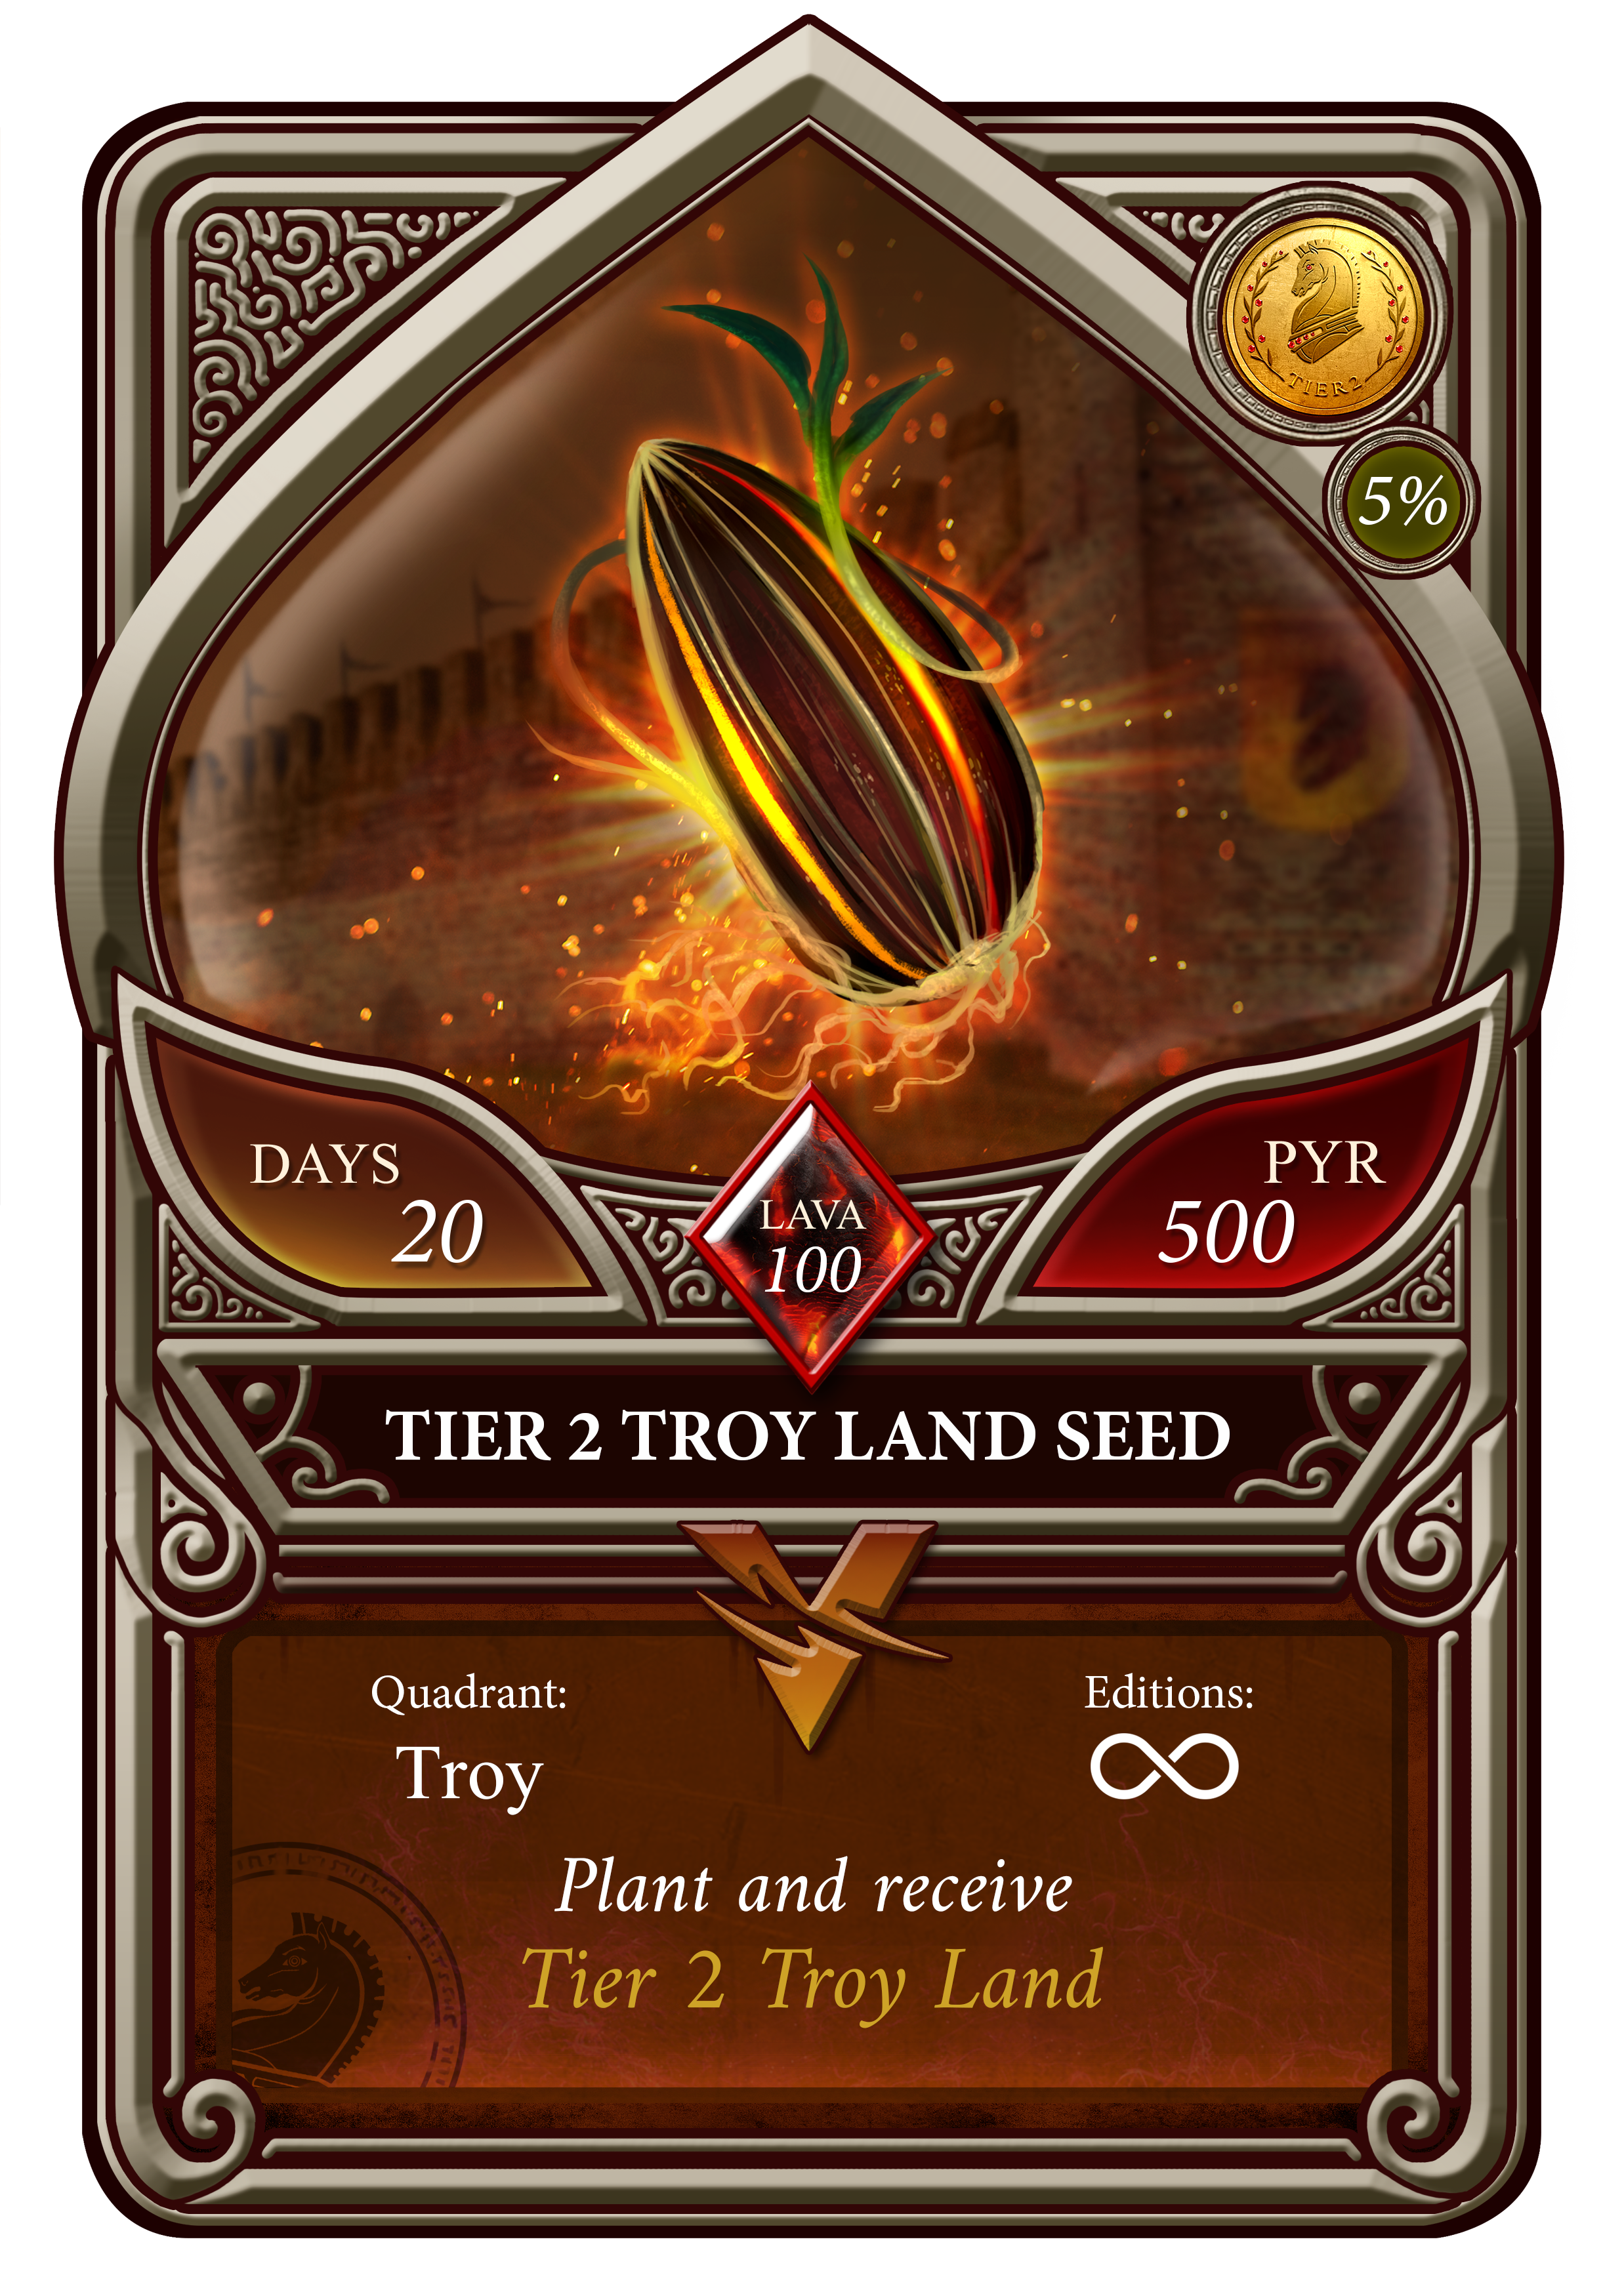 Tier 2 Troy Land Seed